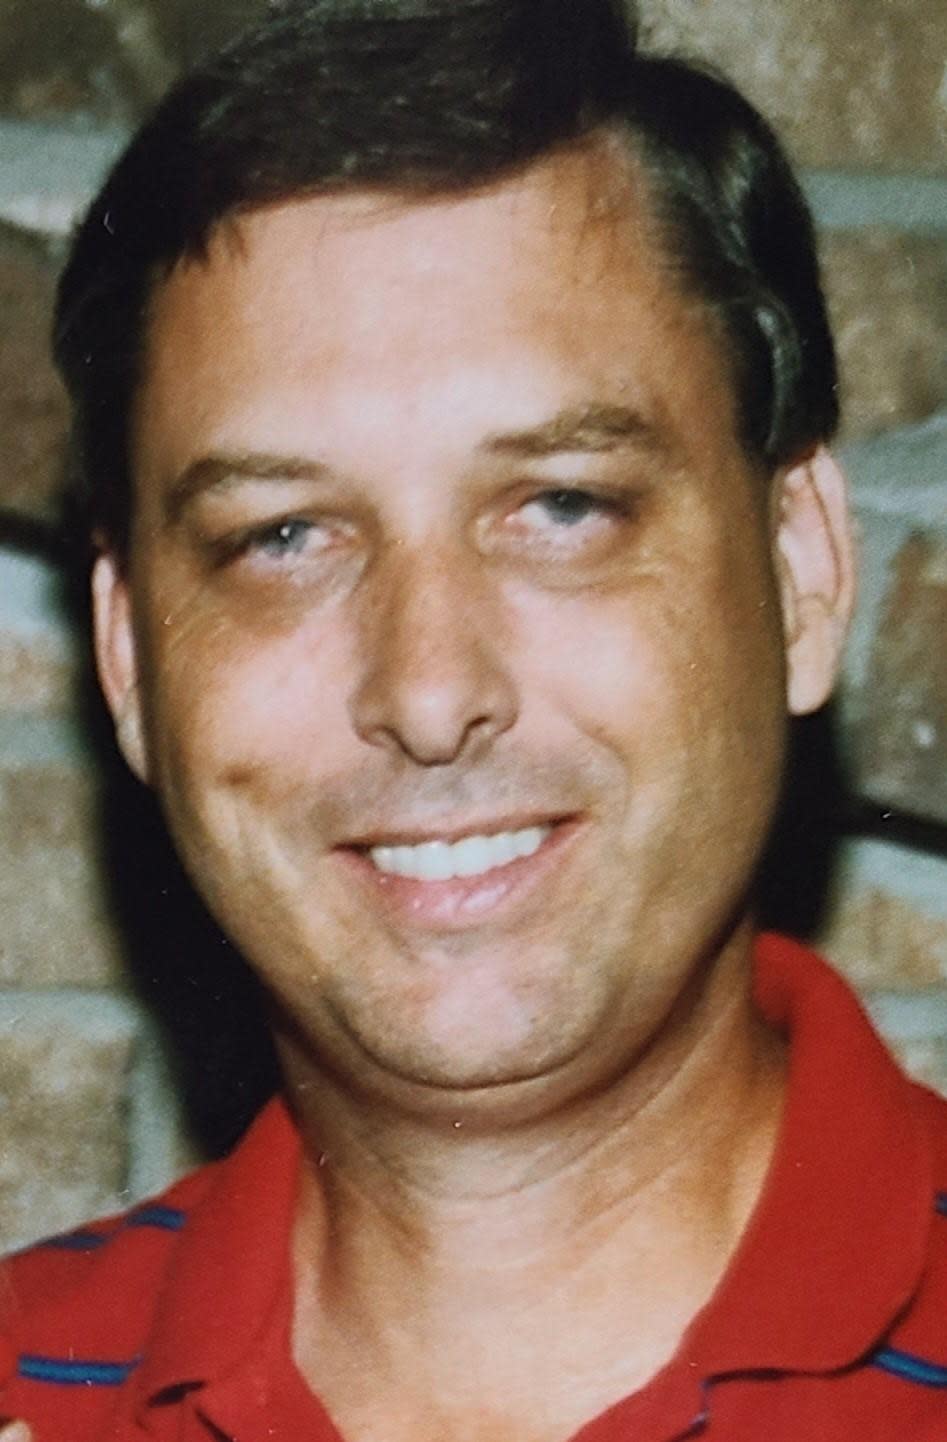 An image of Roger Dale Parham provided by the National Missing and Unidentified Persons System and the Kentucky State Police. / Credit: Kentucky State Police via NAMUS